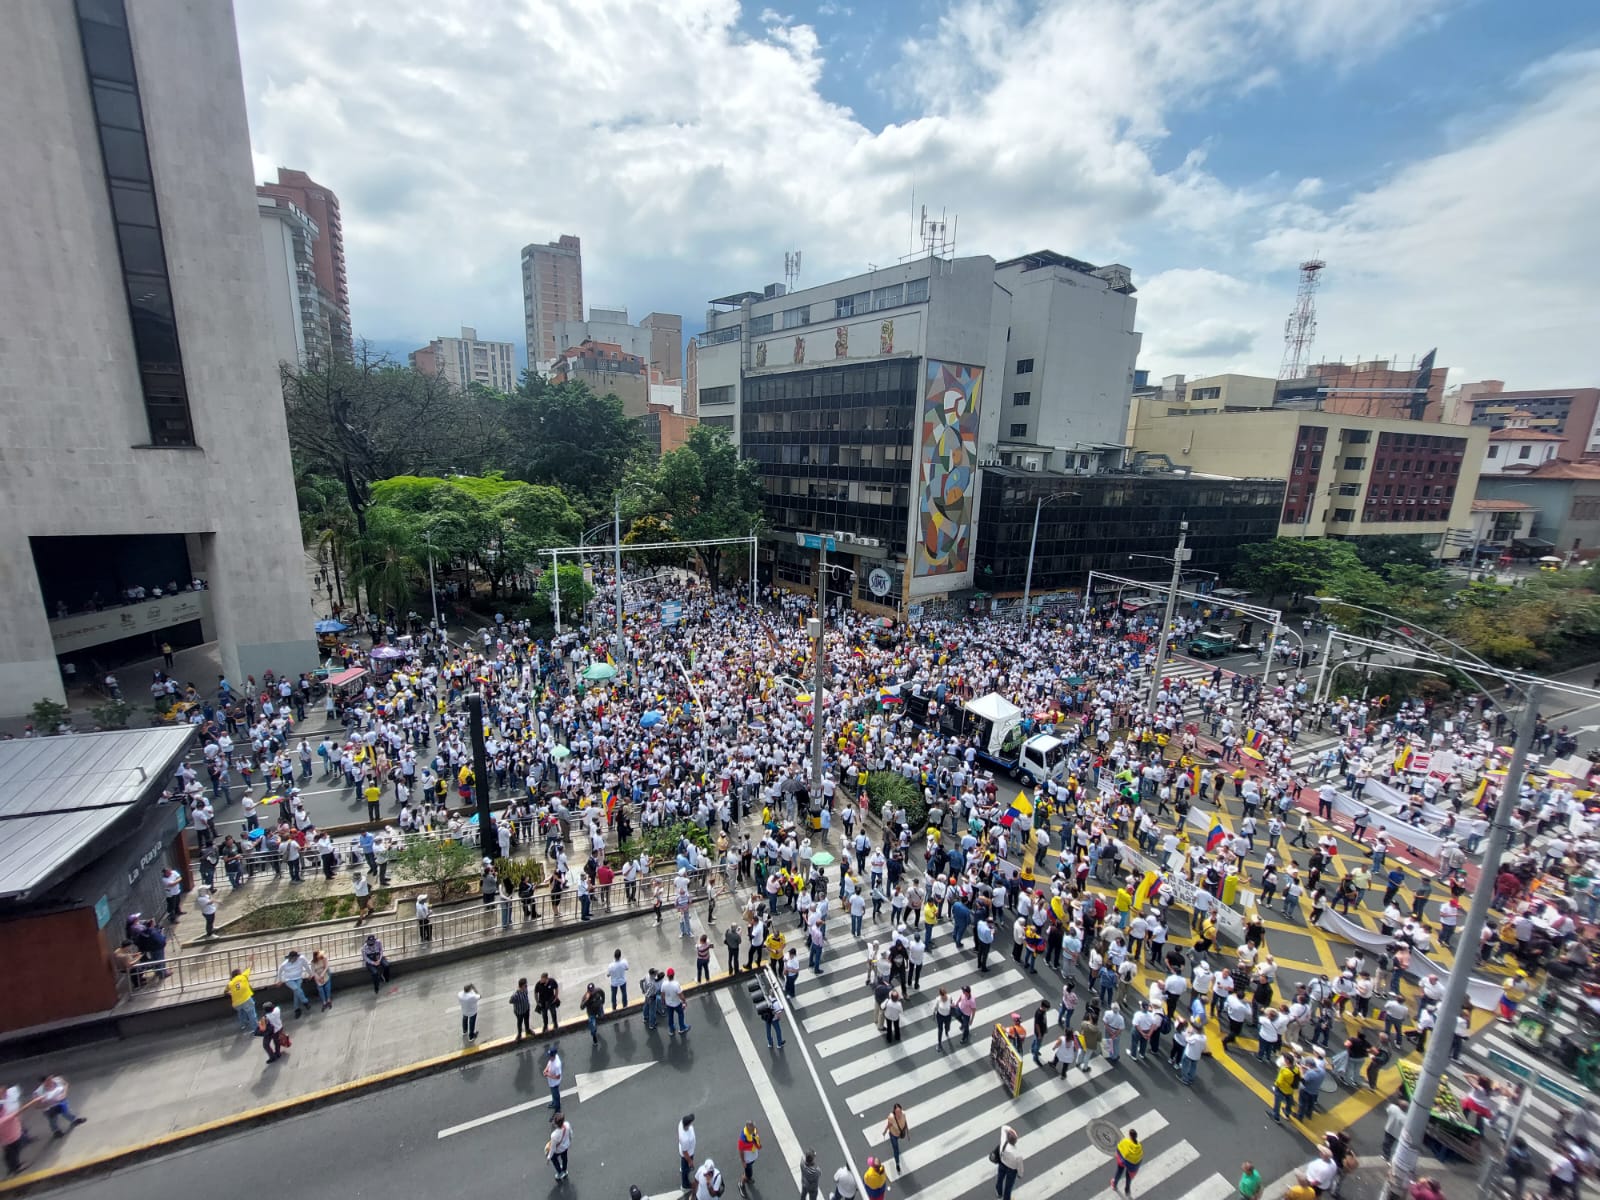 Marches on Sunday, April 21 in Medellín: these are the concentration points